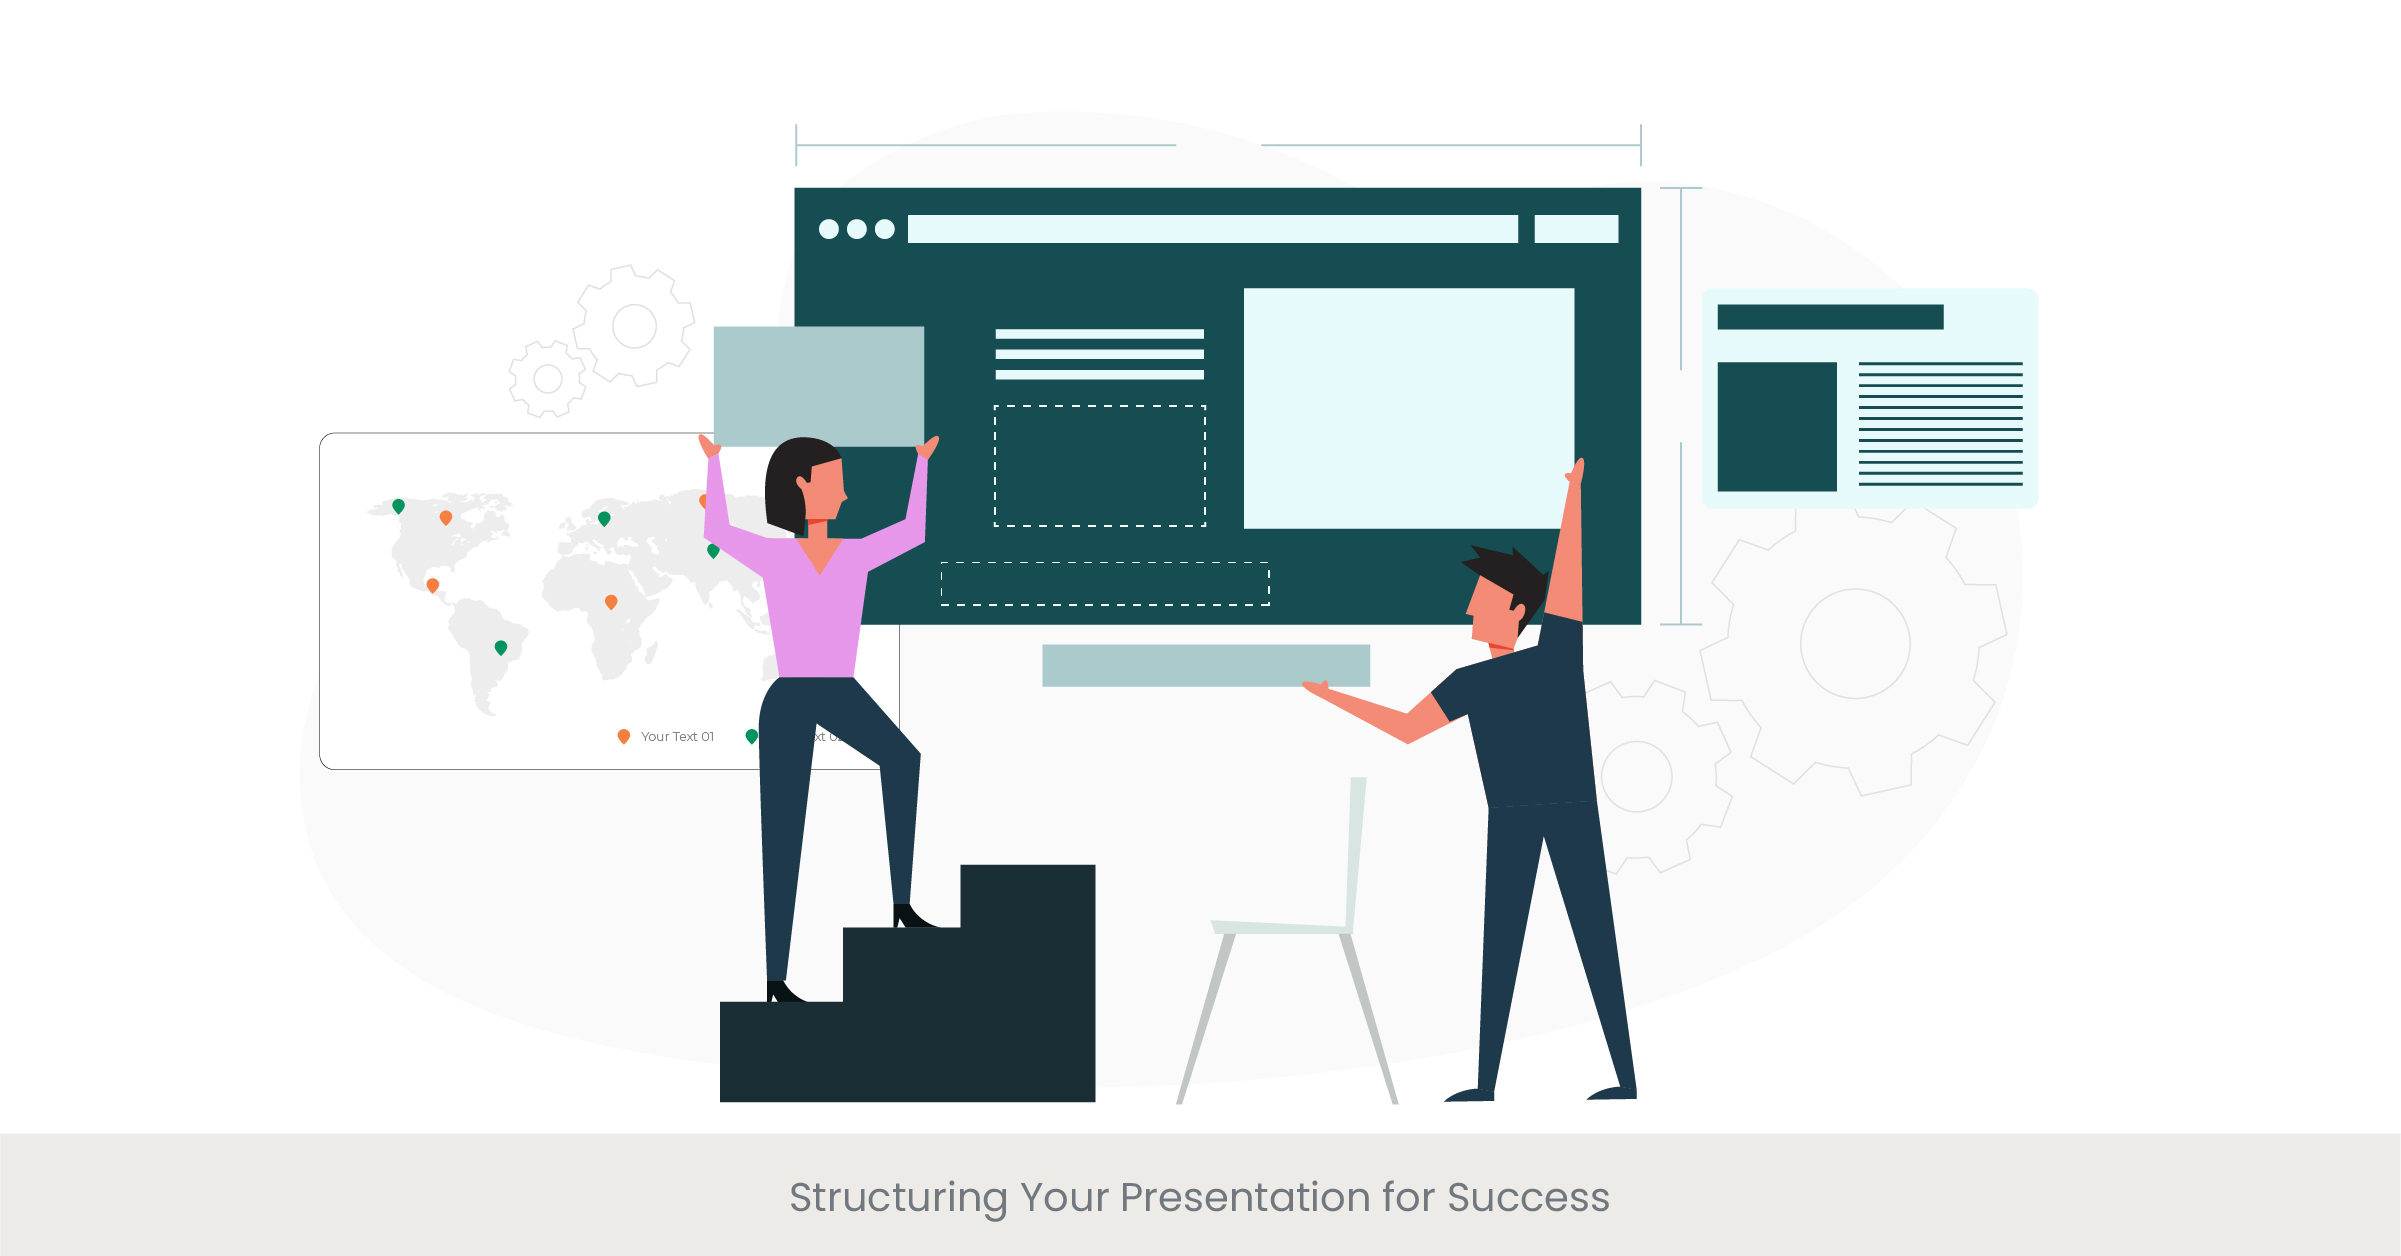 Structuring Your Presentation for Success